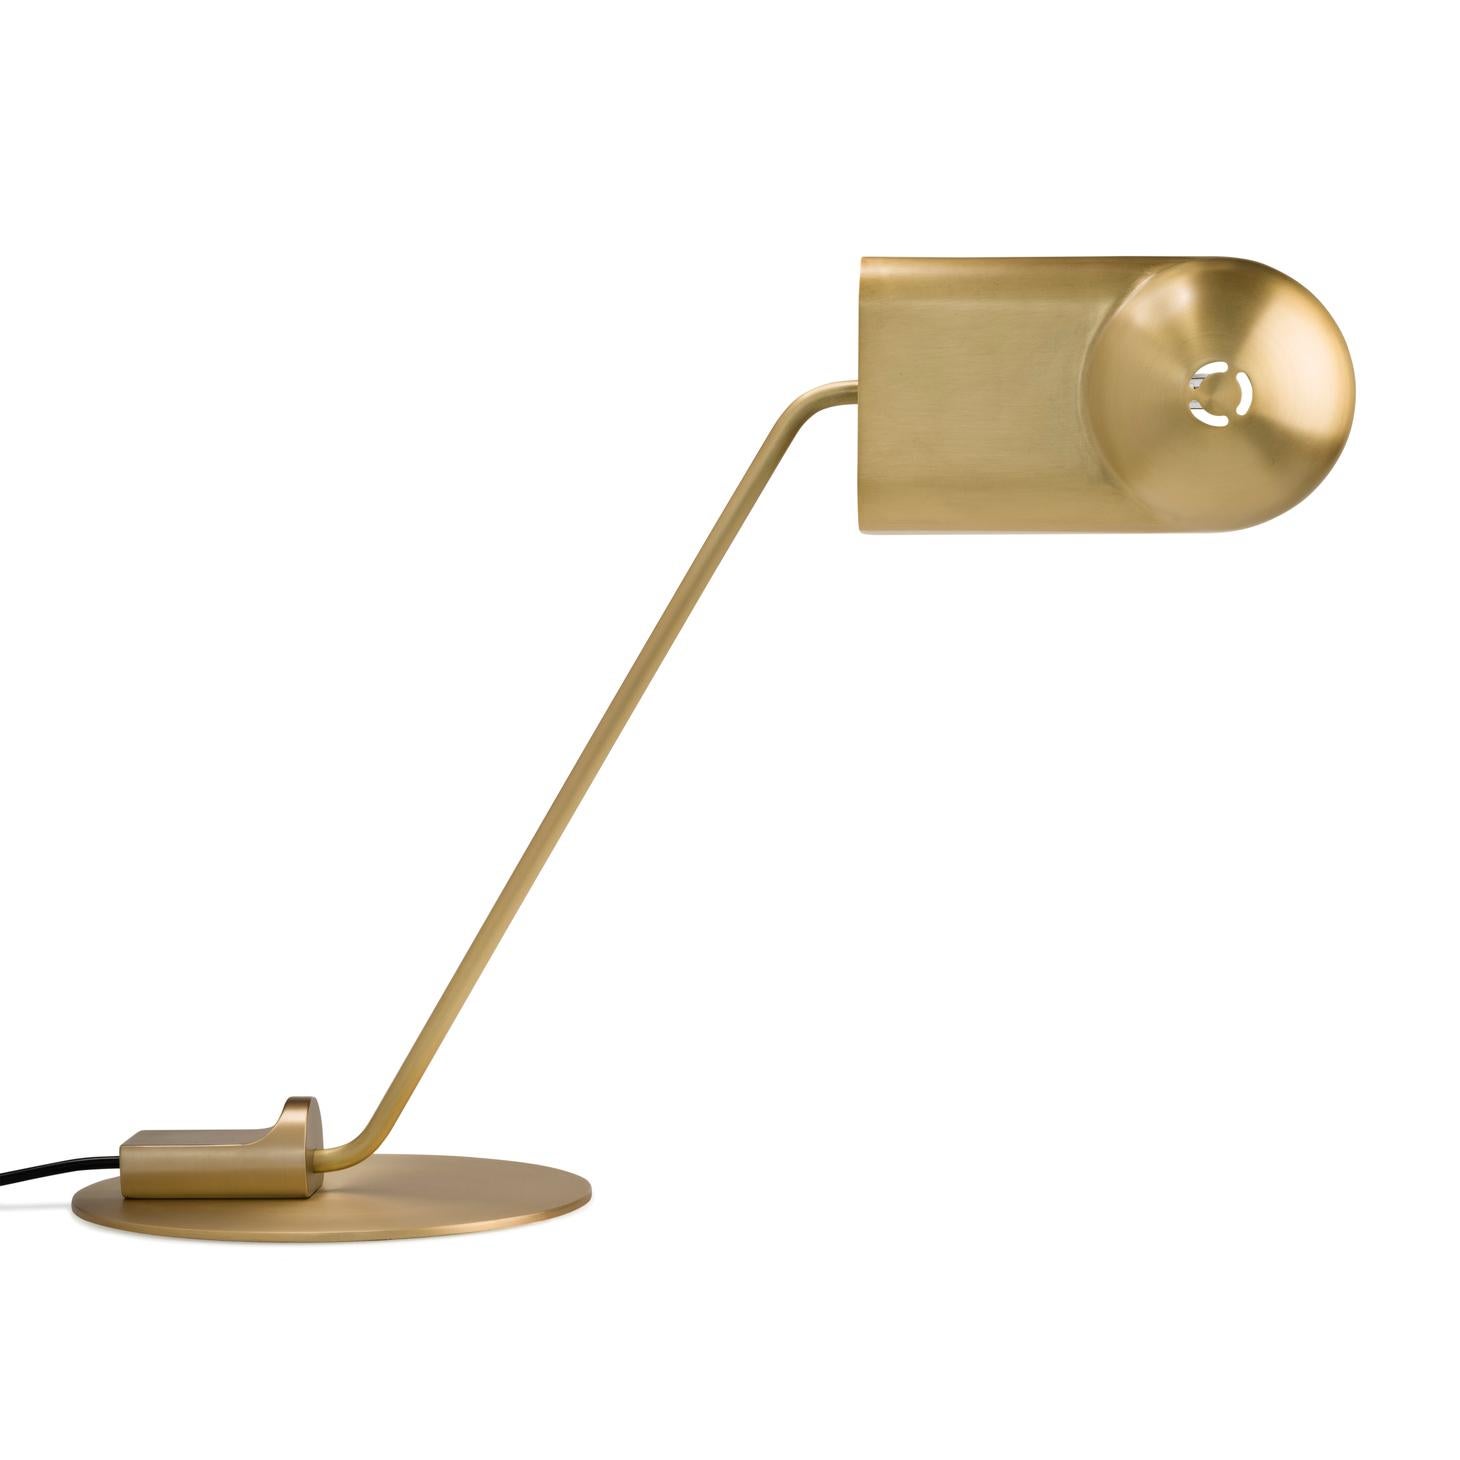 Table lamp designed by Joe Colombo in 1965.

The Domo lamp was originally designed by Italian designer Joe Colombo in 1965. Back then he designed three lamps based on the same core shape. Known for his democratic and functional design, his flexible